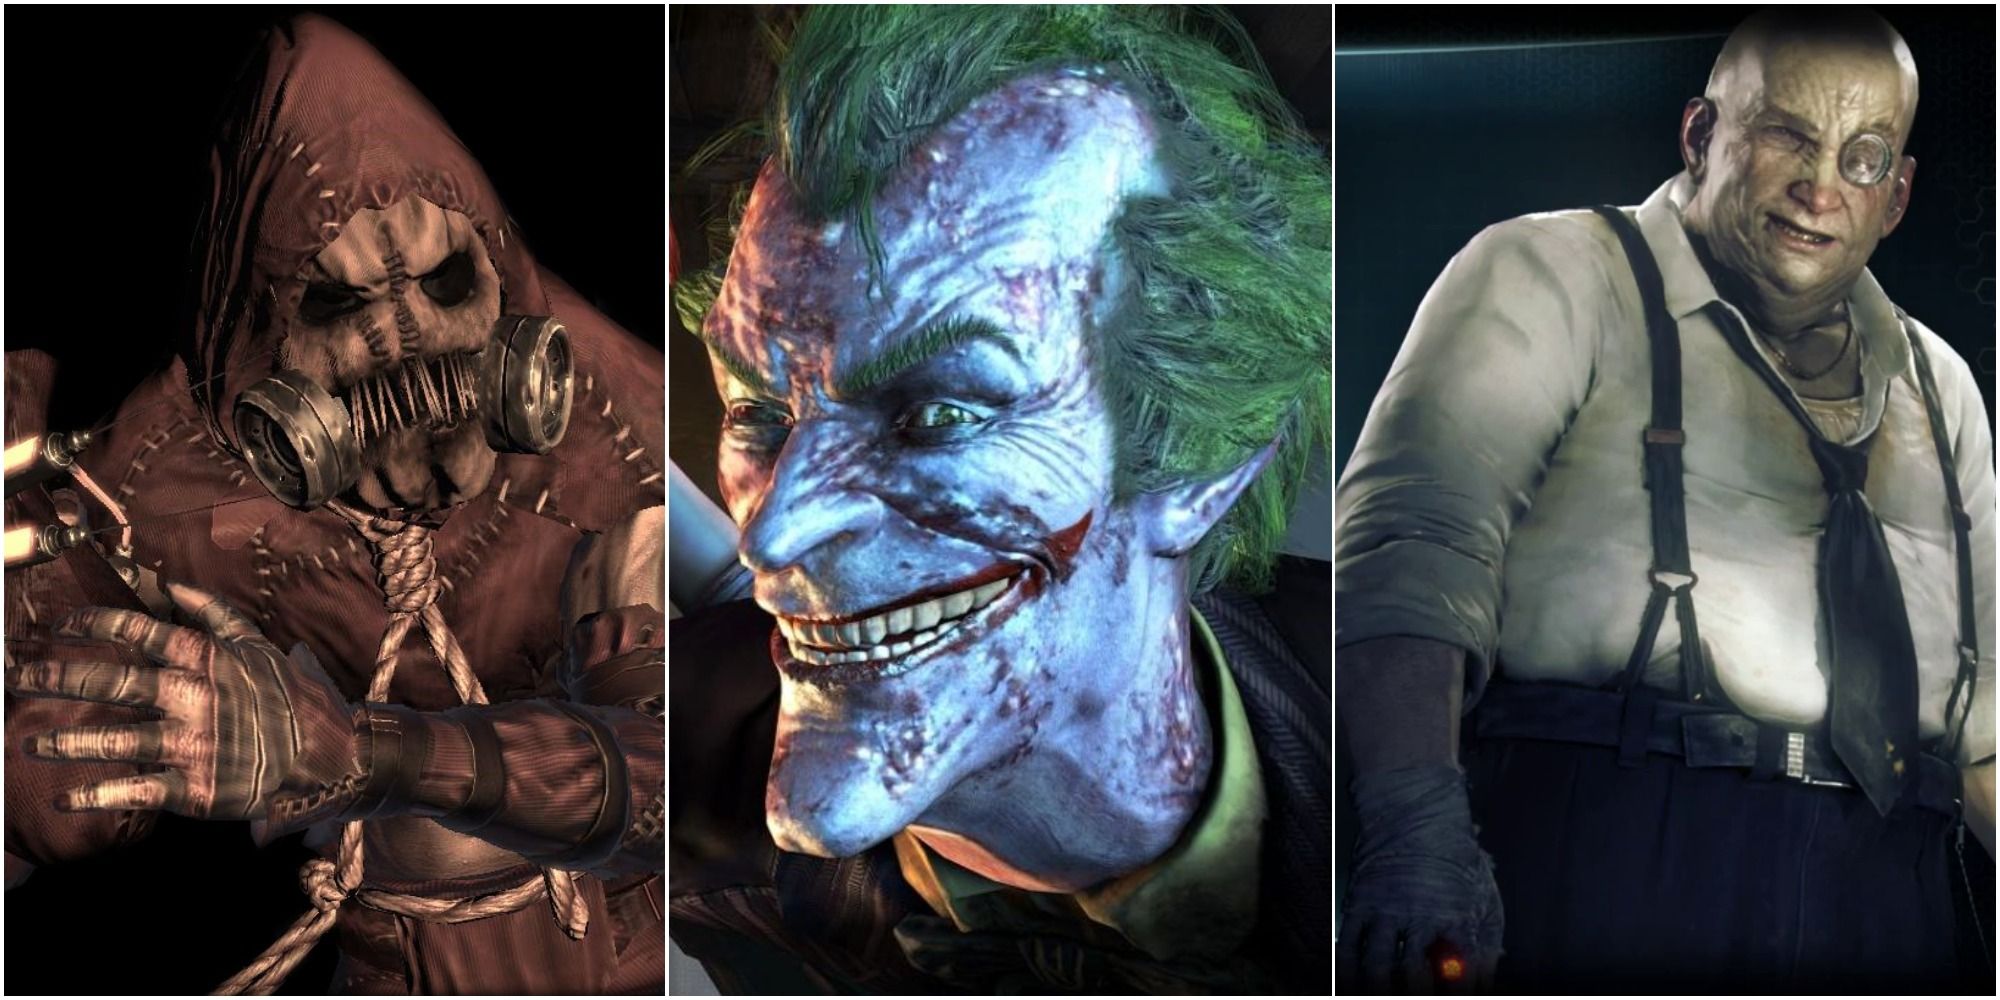 A closeup of Scarecrow from Arkham Asylum, The Joker smiling maniacally and the Penguin grinning, left to right